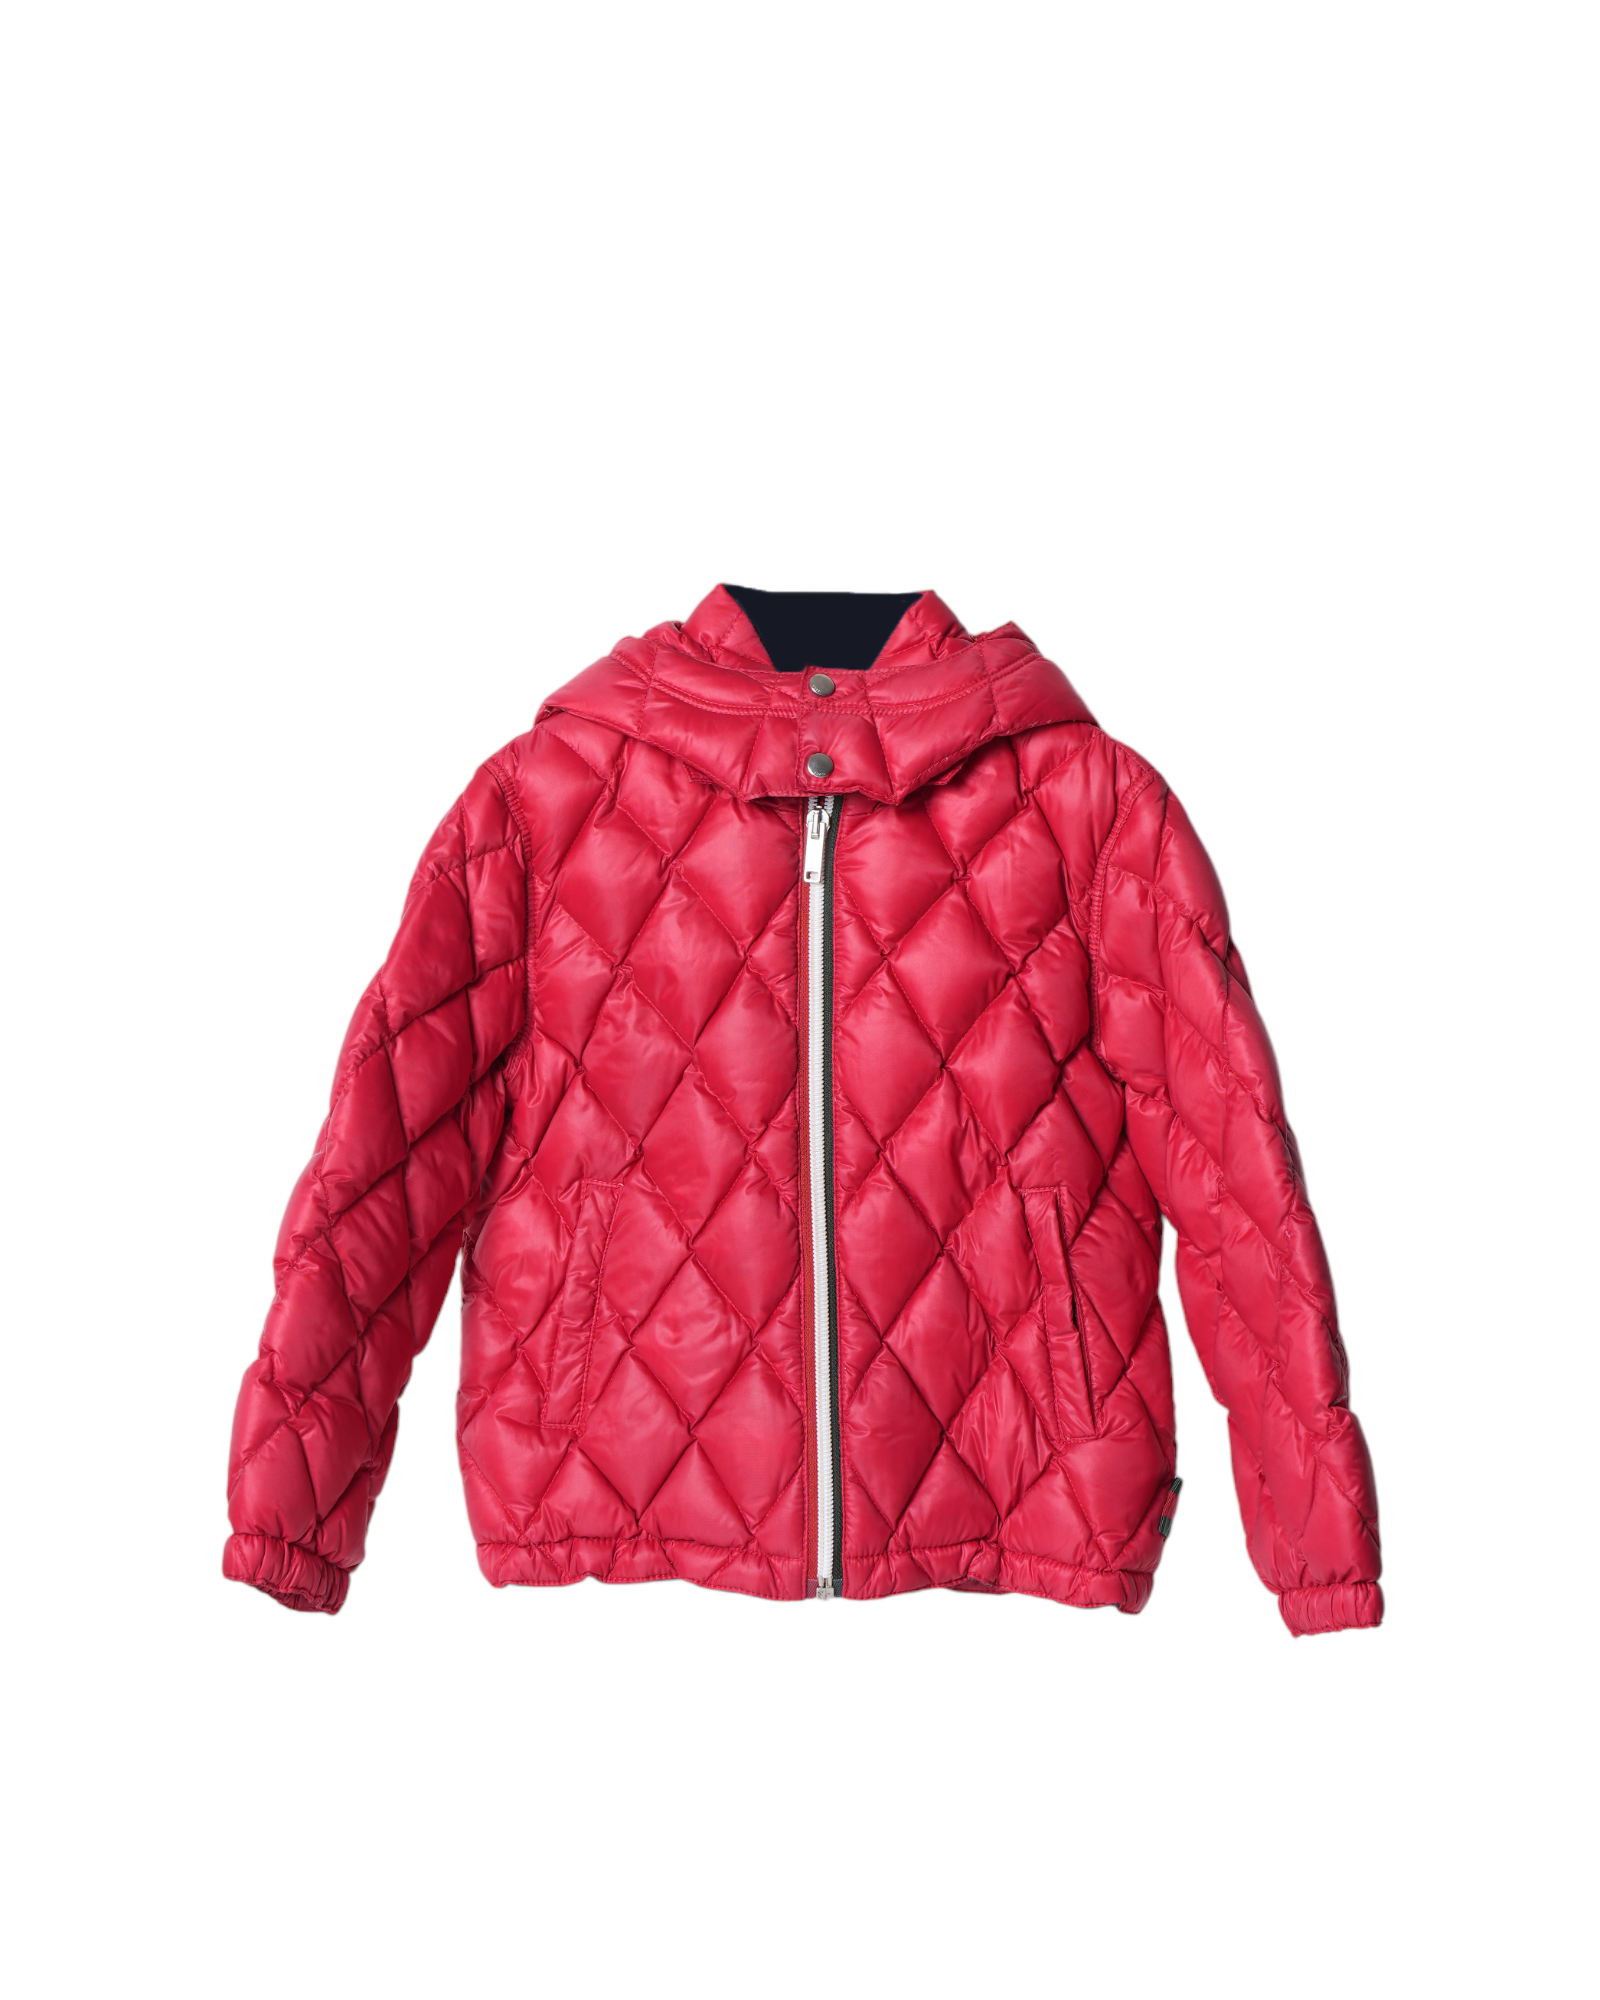 Gucci Red Jacket